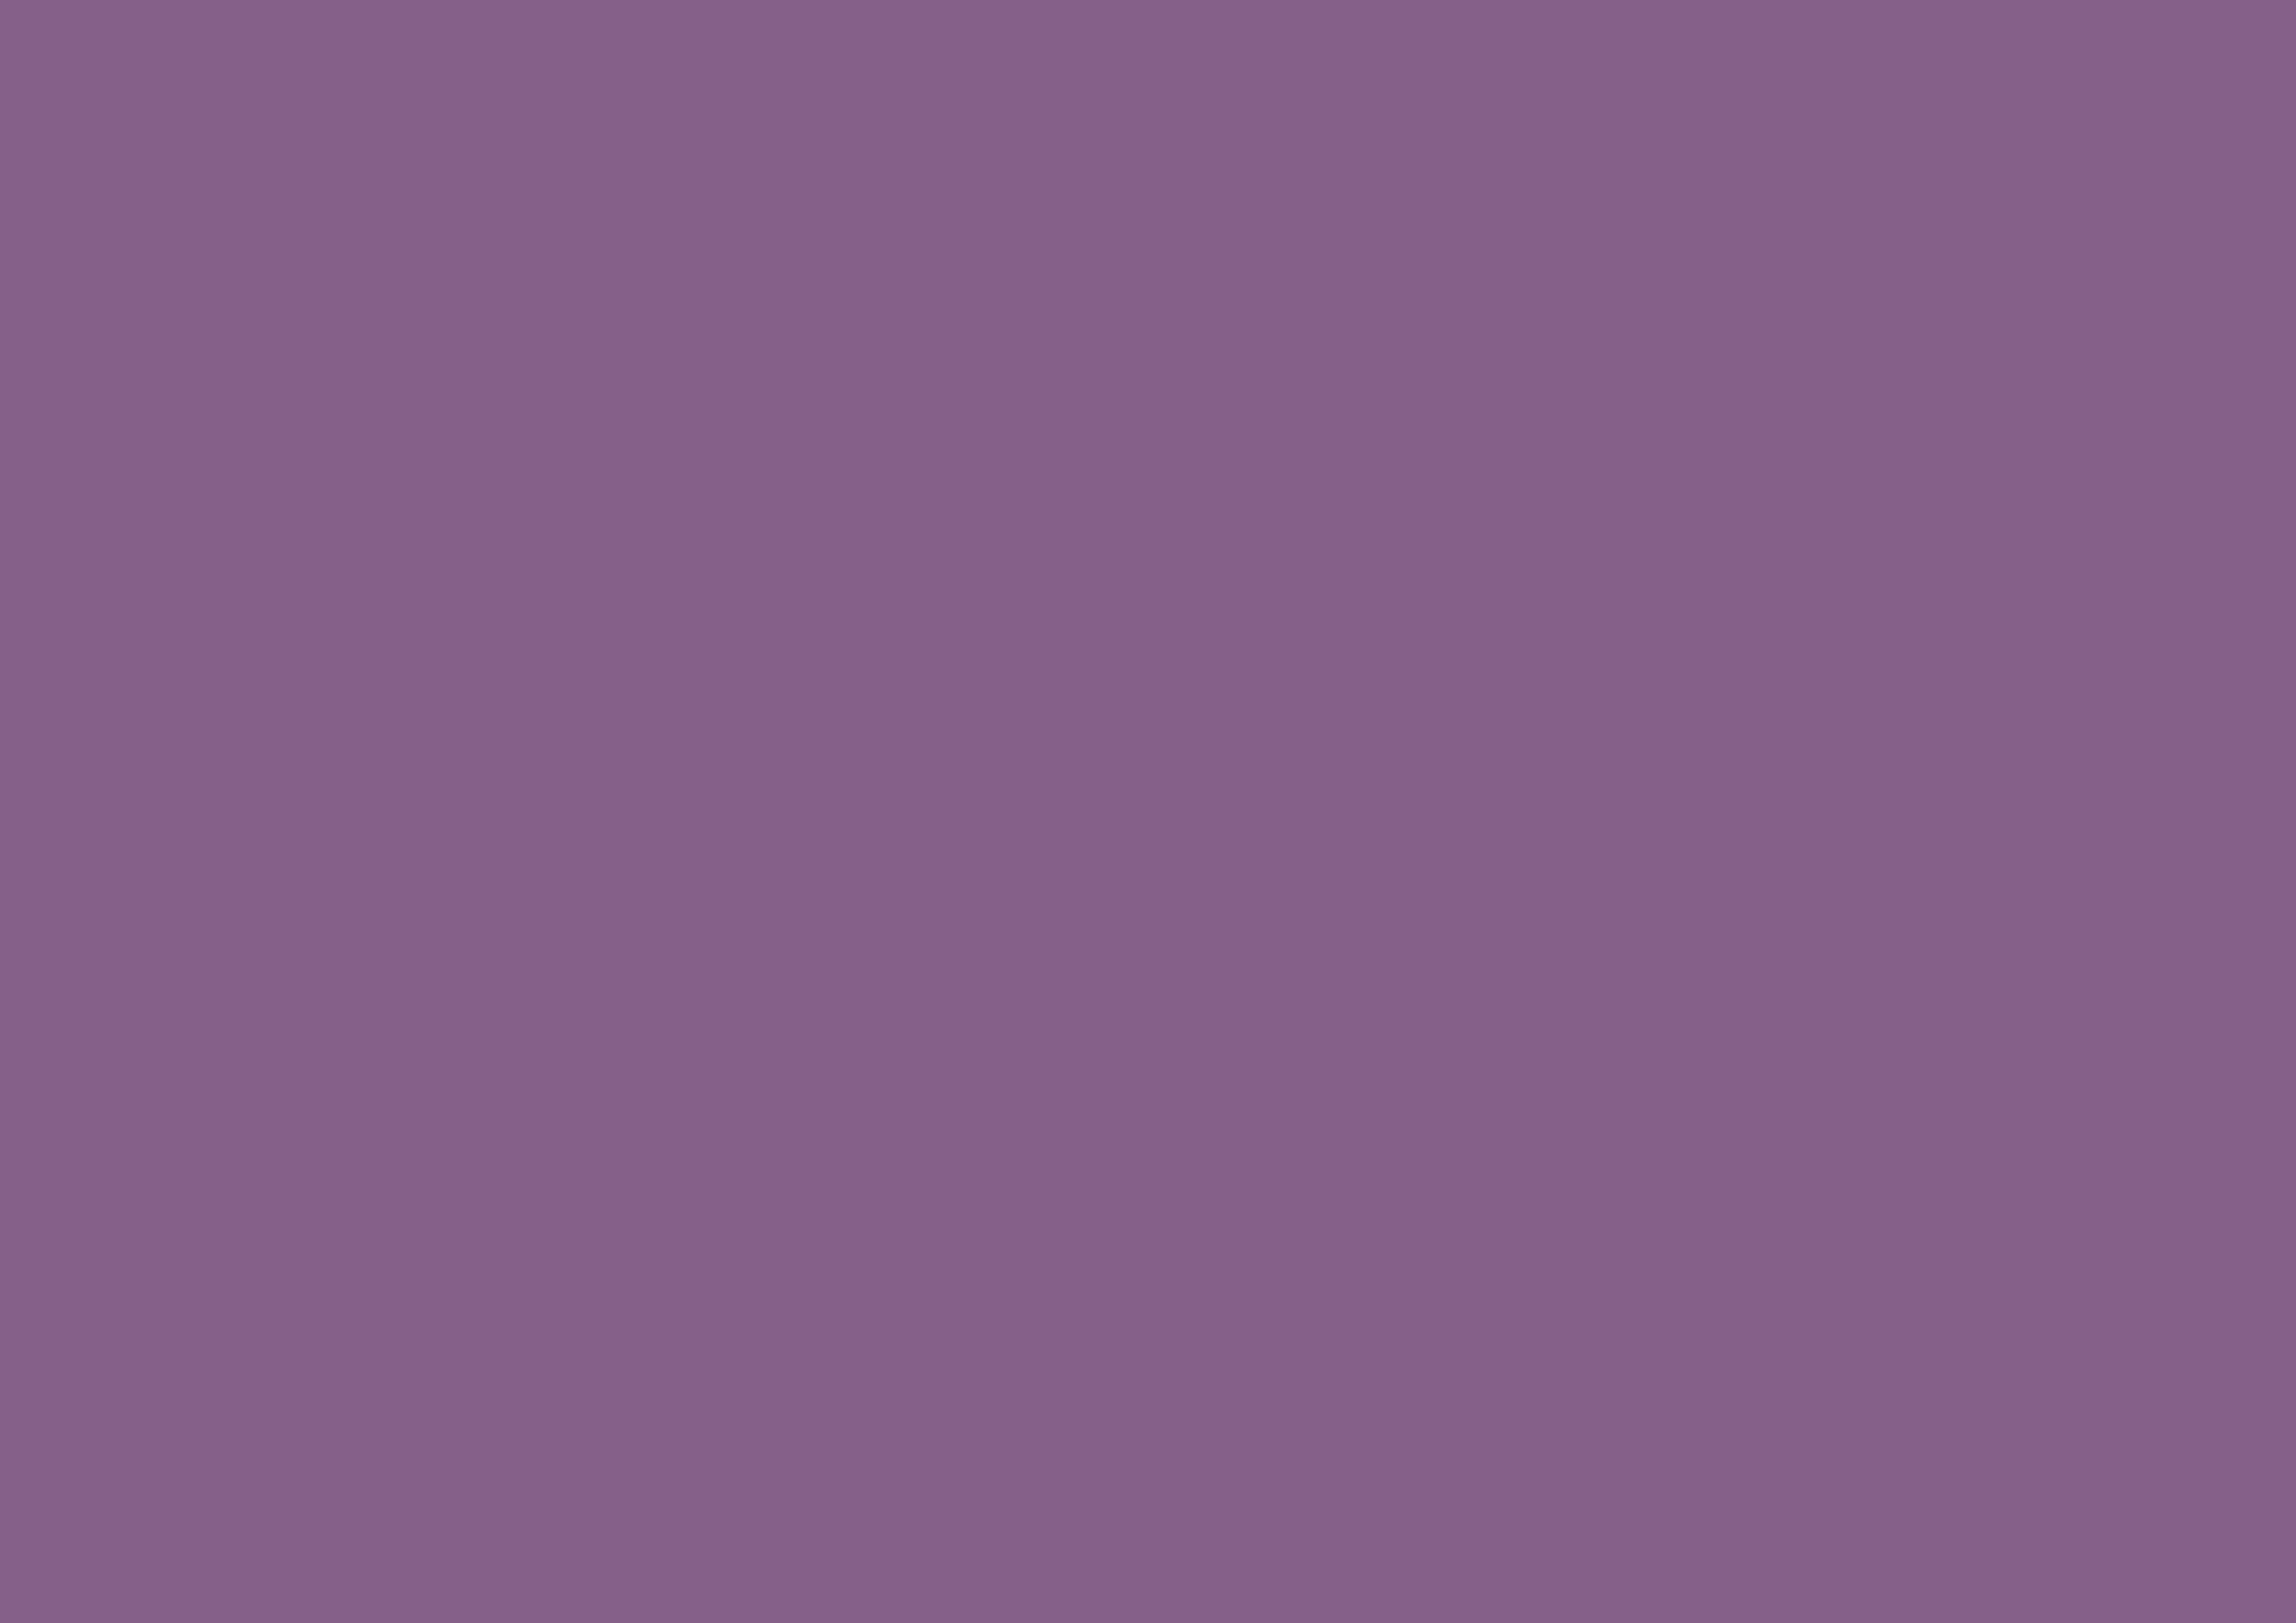 3508x2480 Chinese Violet Solid Color Background